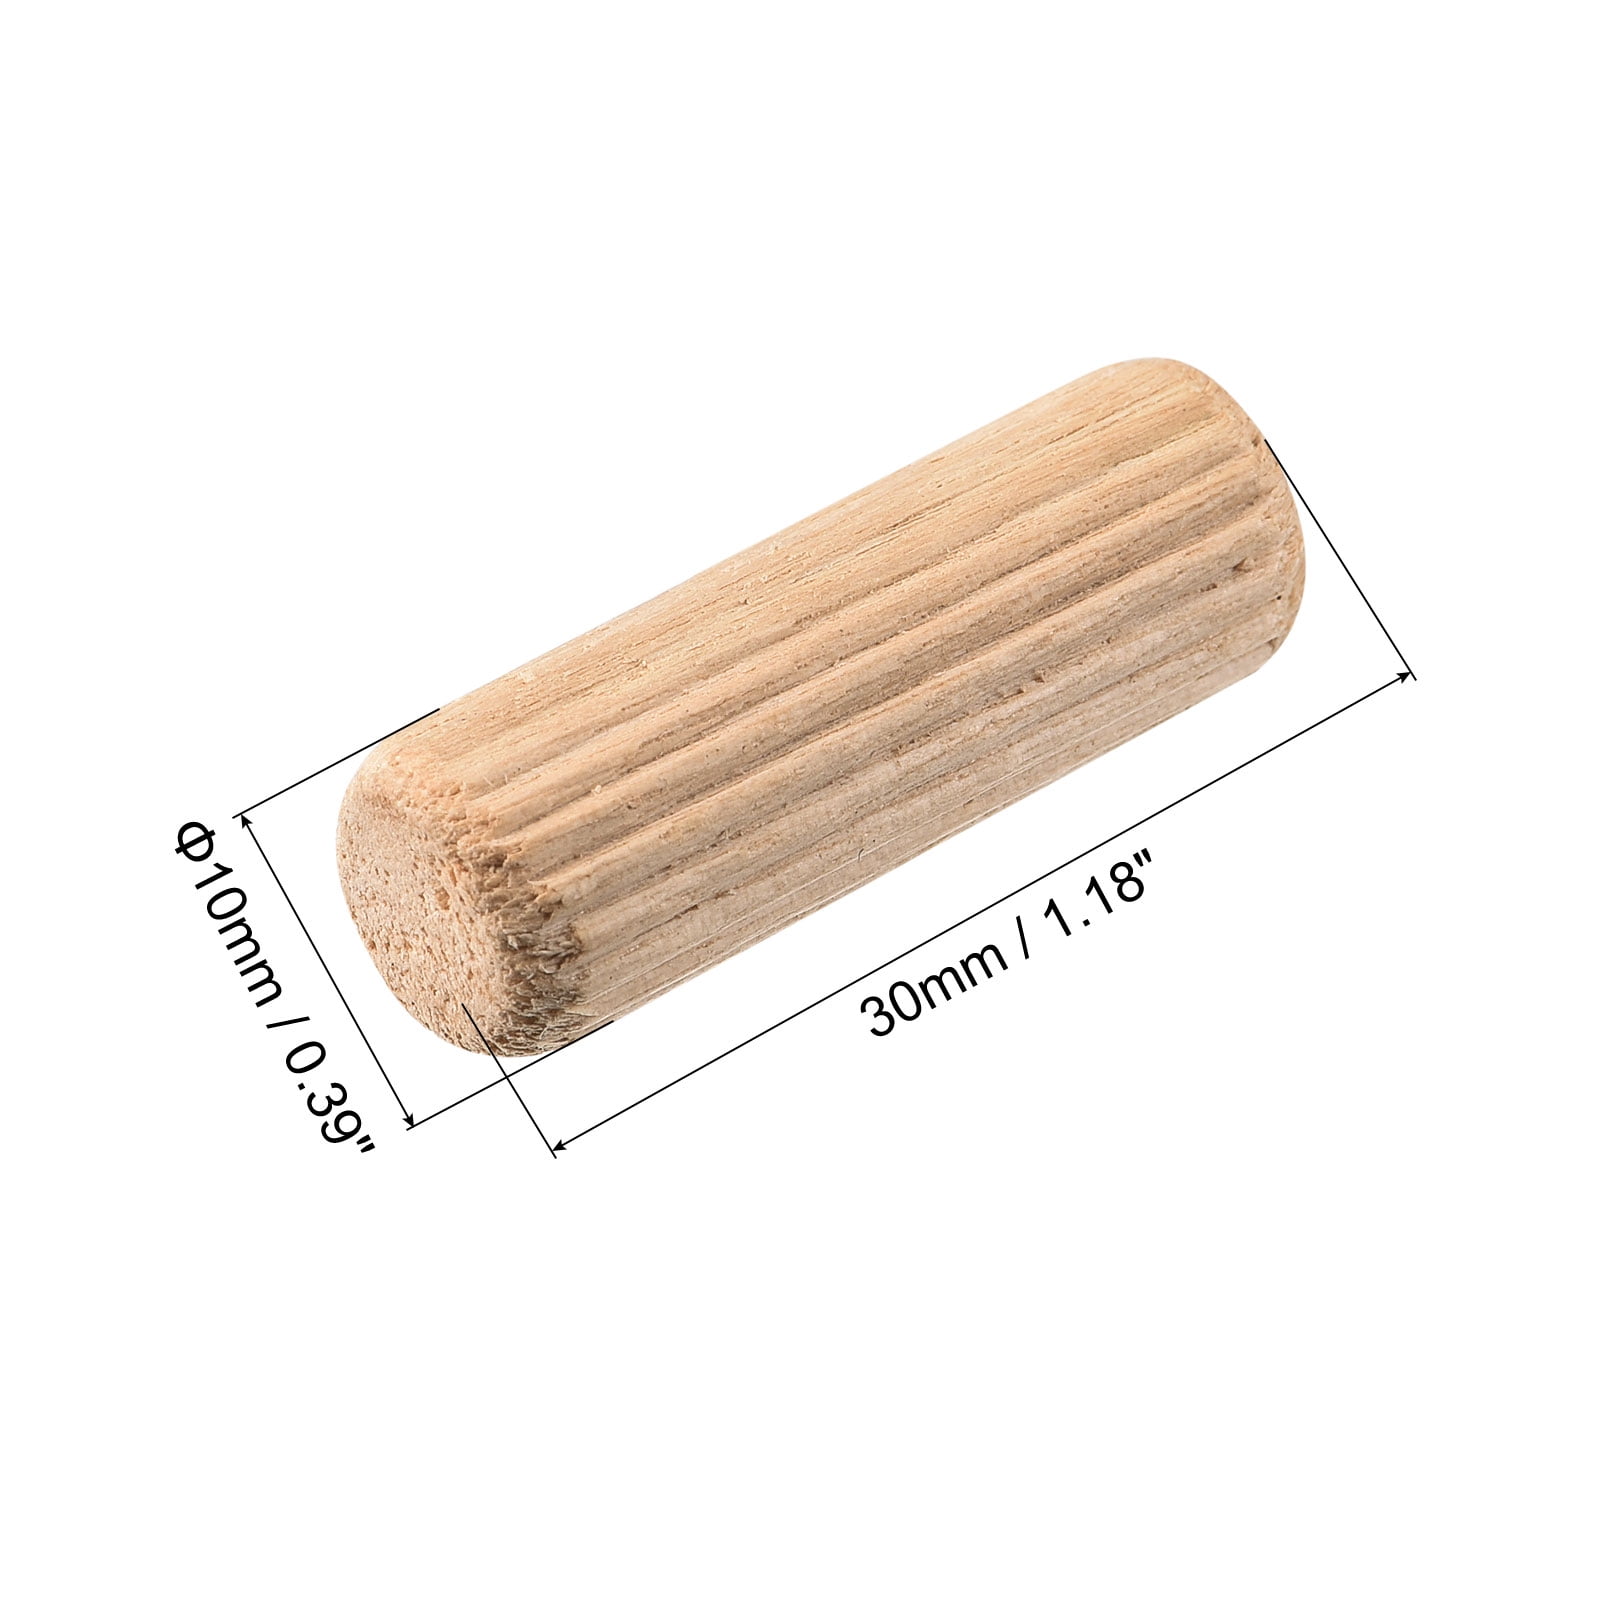 25 Pcs Furniture Wood Plute Pins Wooden Dowels Replacement 50mm x